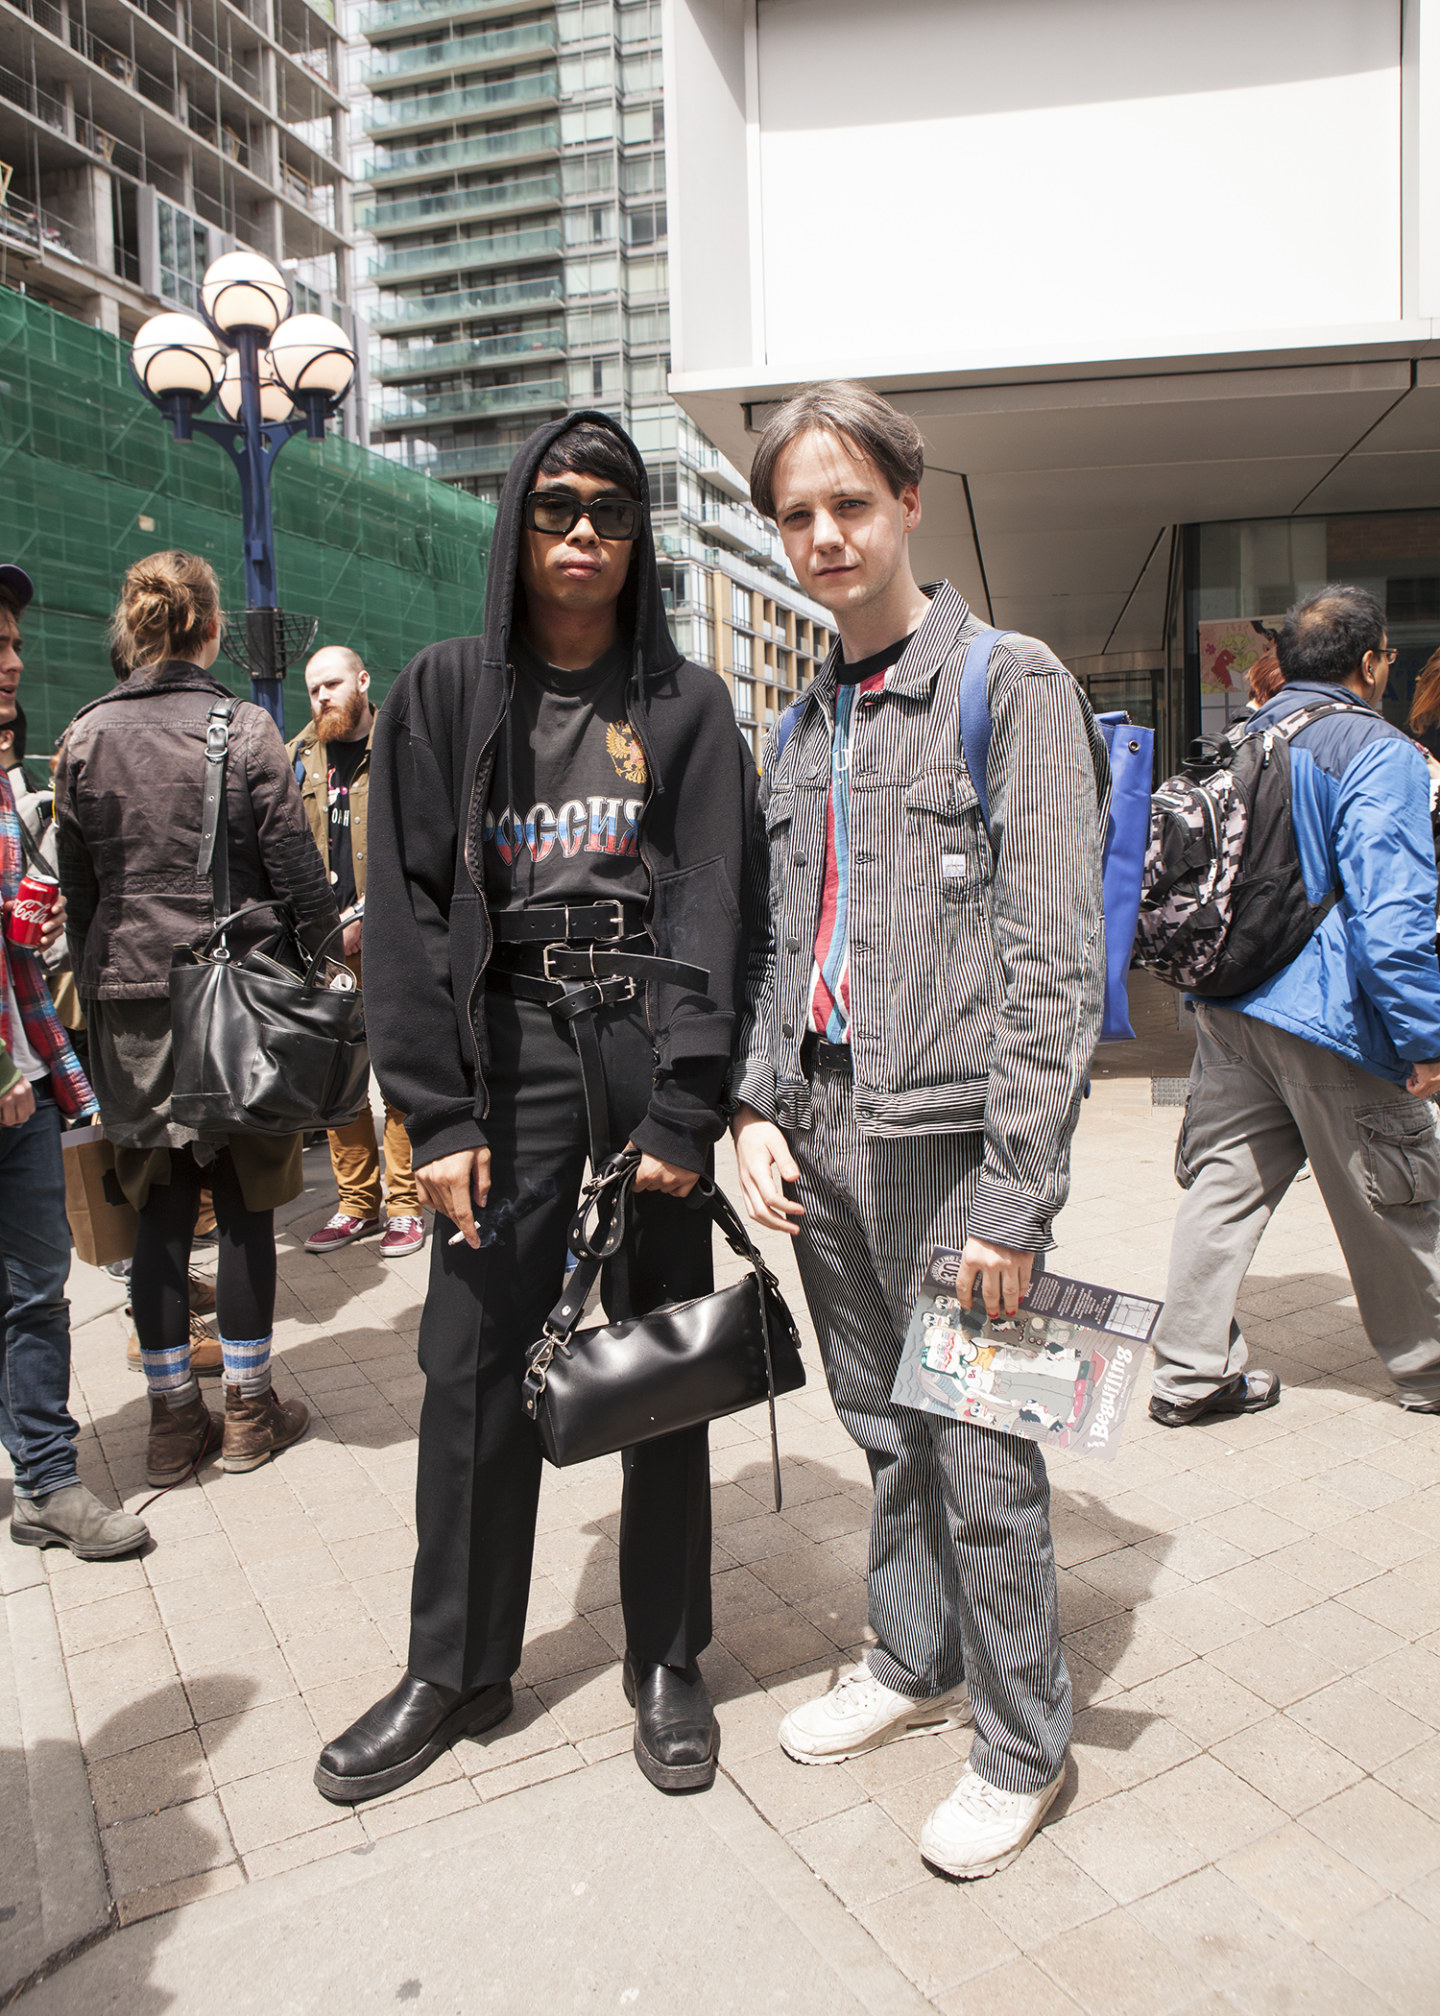 Toronto comic fans can rock the hell out of a light jacket | The FADER